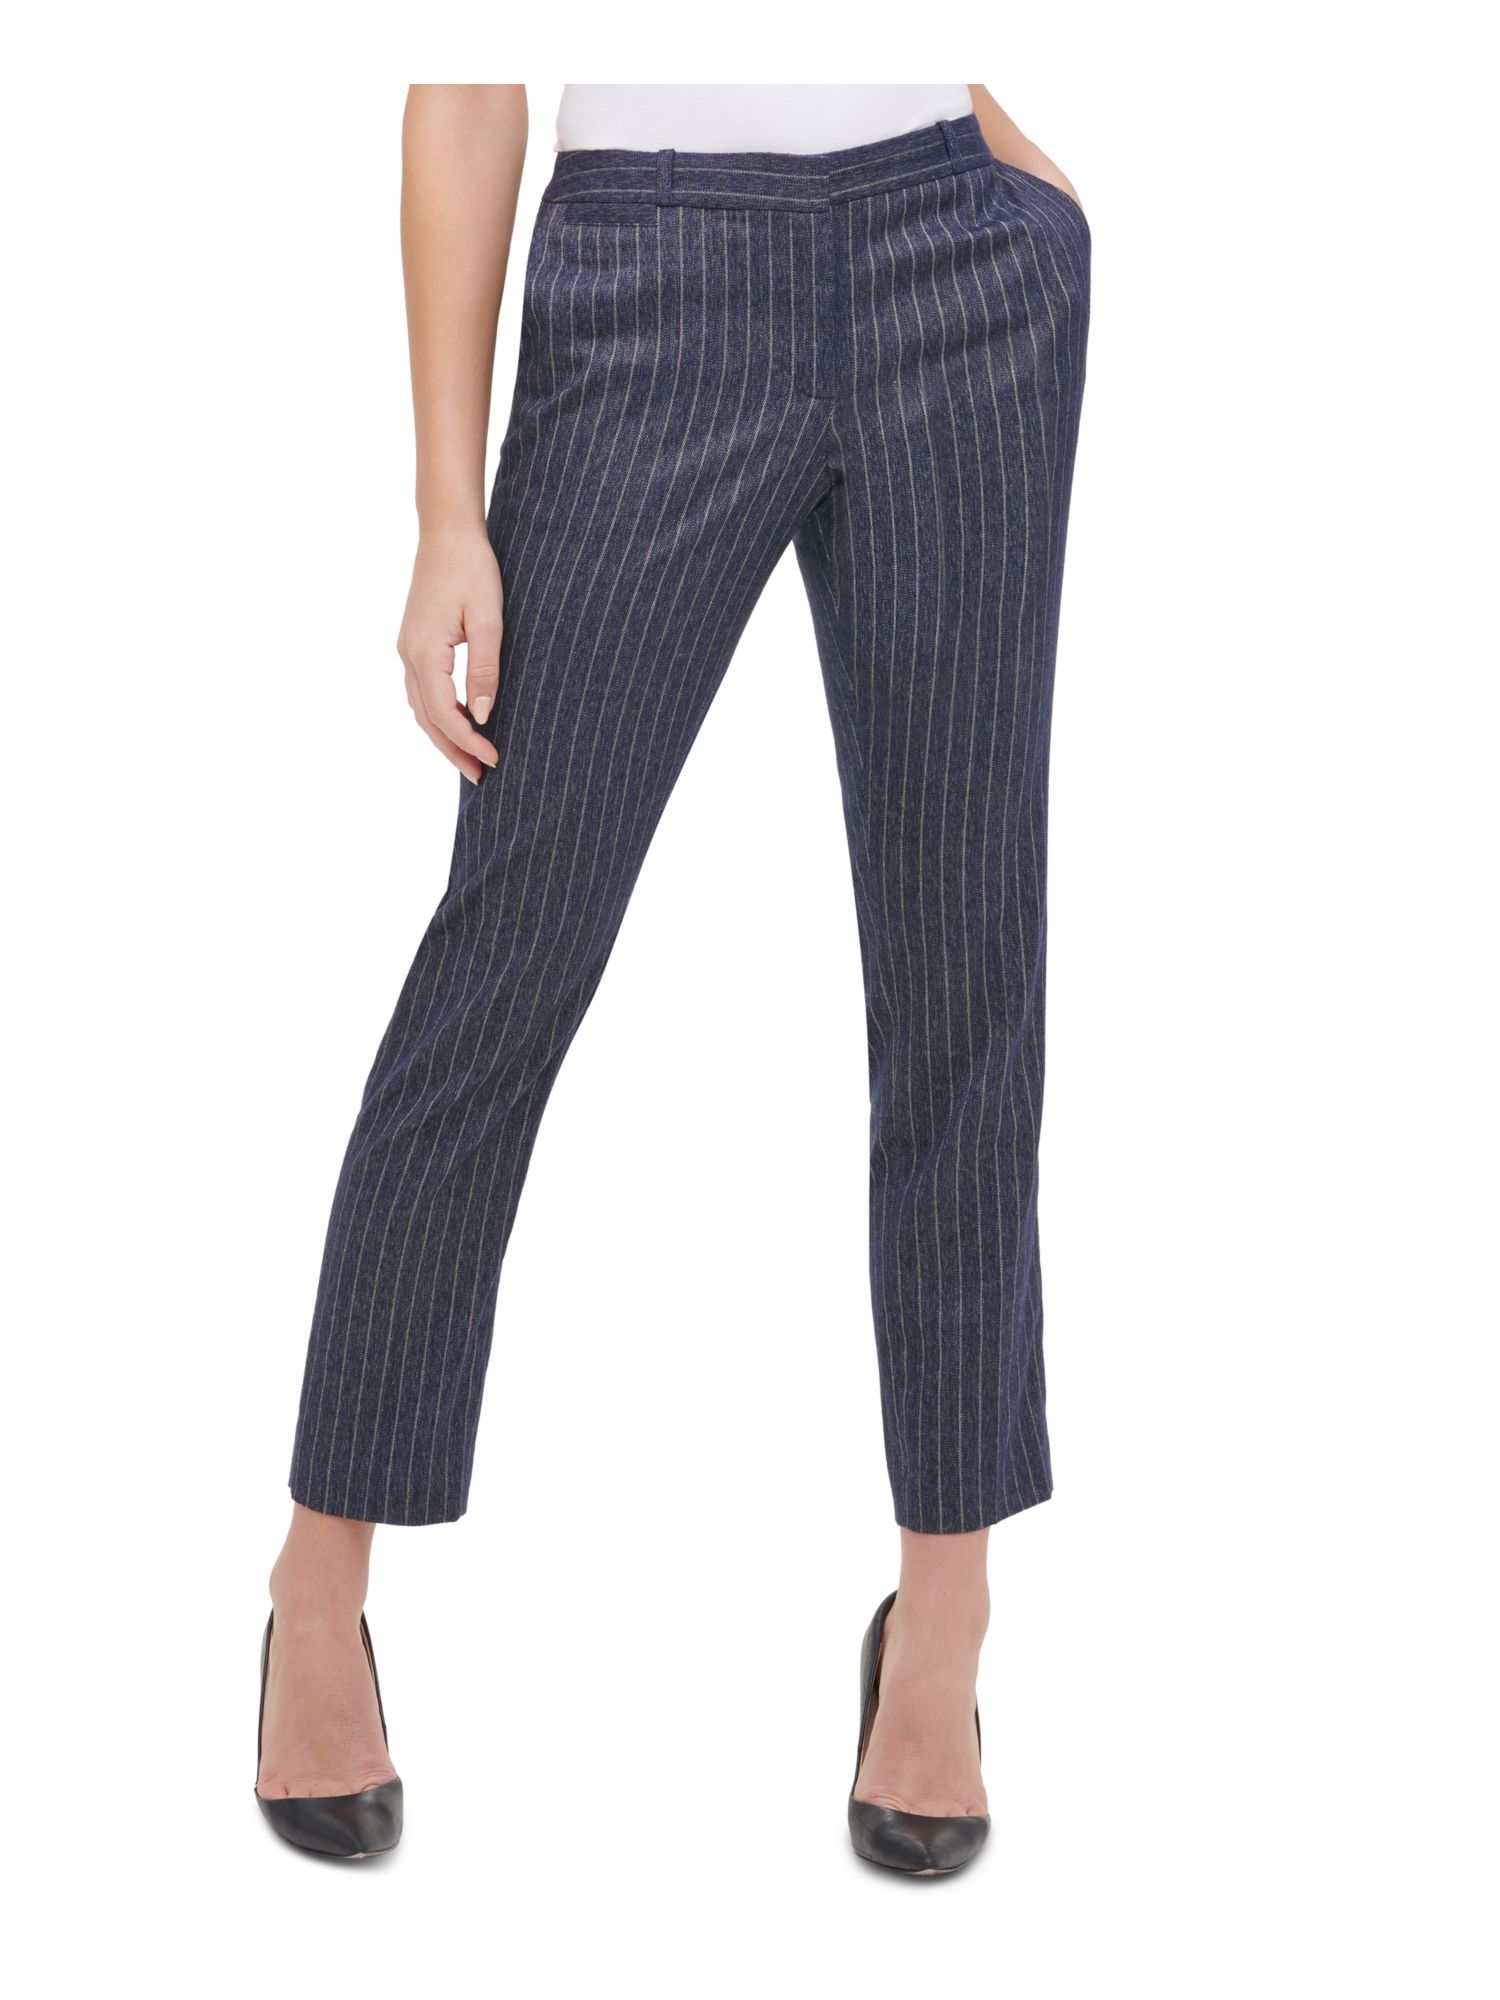 TOMMY HILFIGER Womens Navy Zippered Ankle Pinstripe Wear To Work Straight leg Pants 8 - image 1 of 2